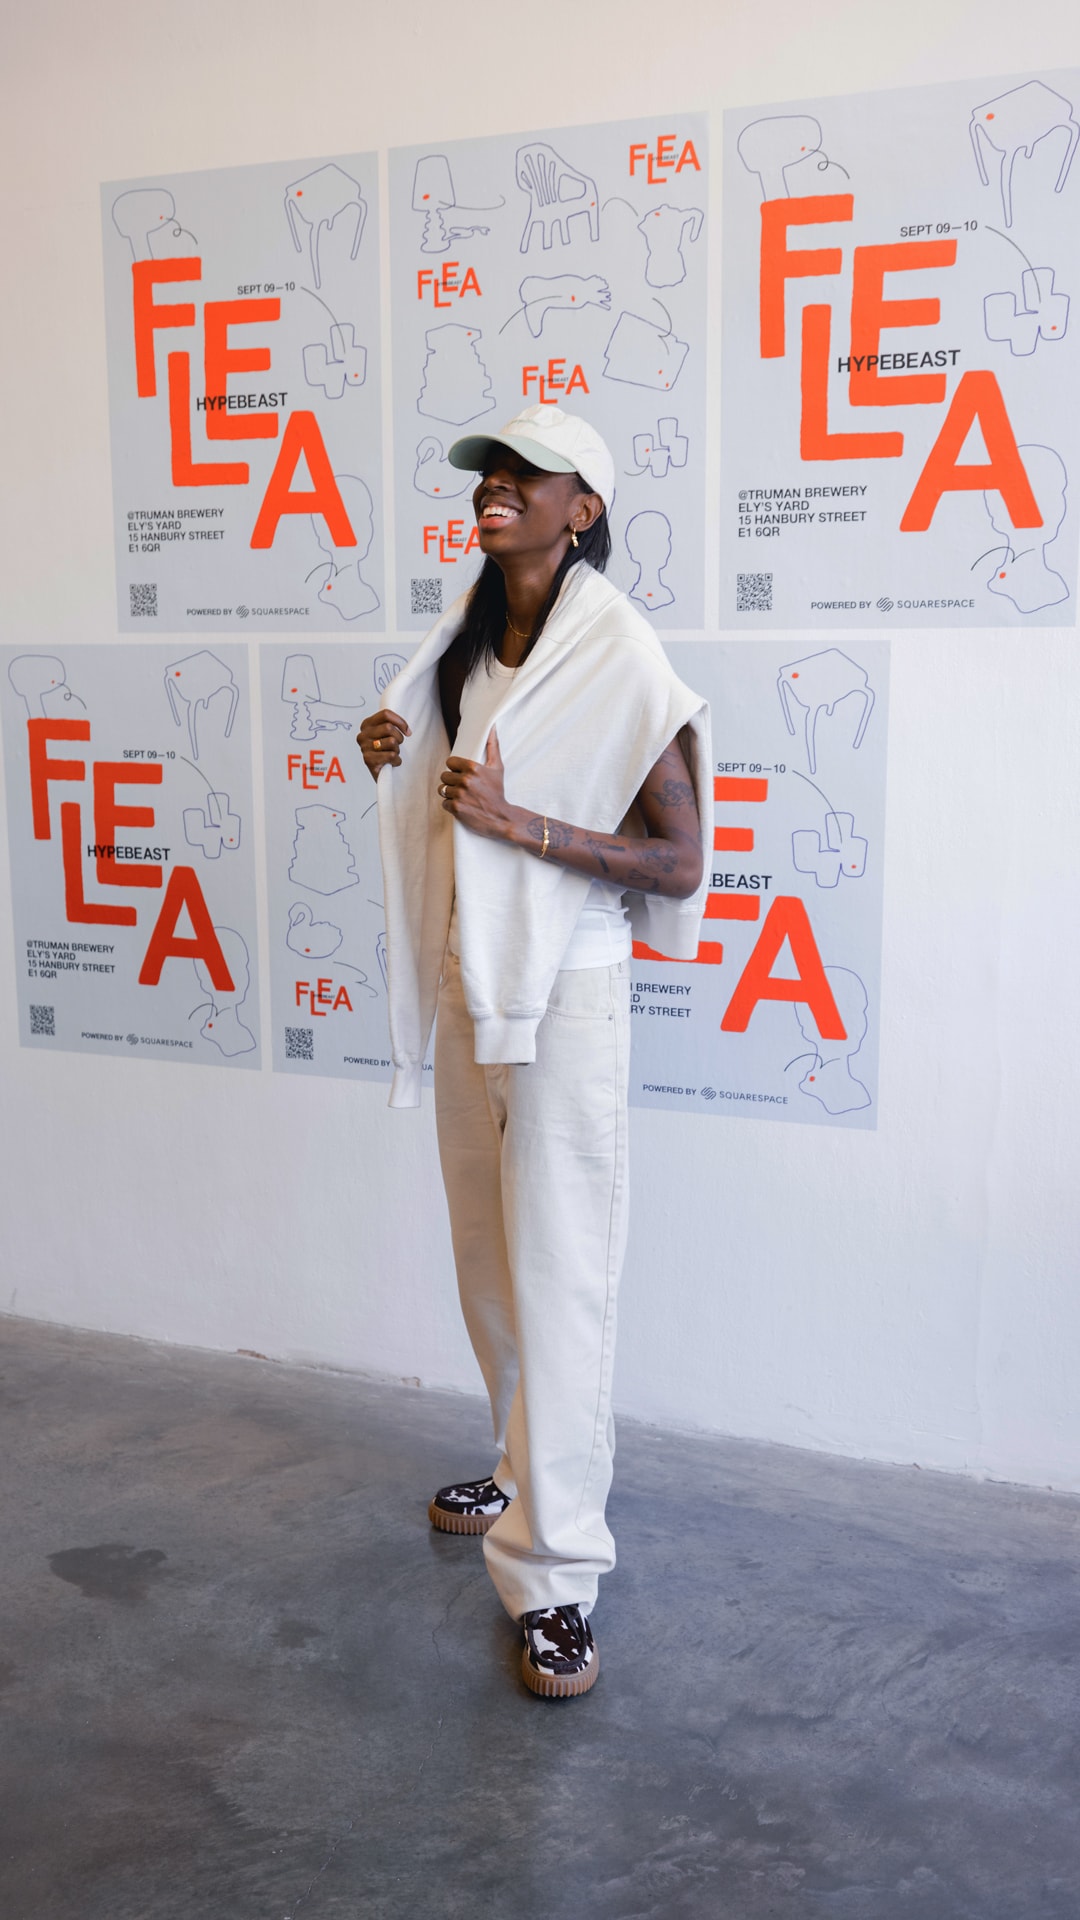 Cat Burns Joins Shoppers to Explore Clarks’ Hottest New Season Footwear at Hypebeast Flea teaser